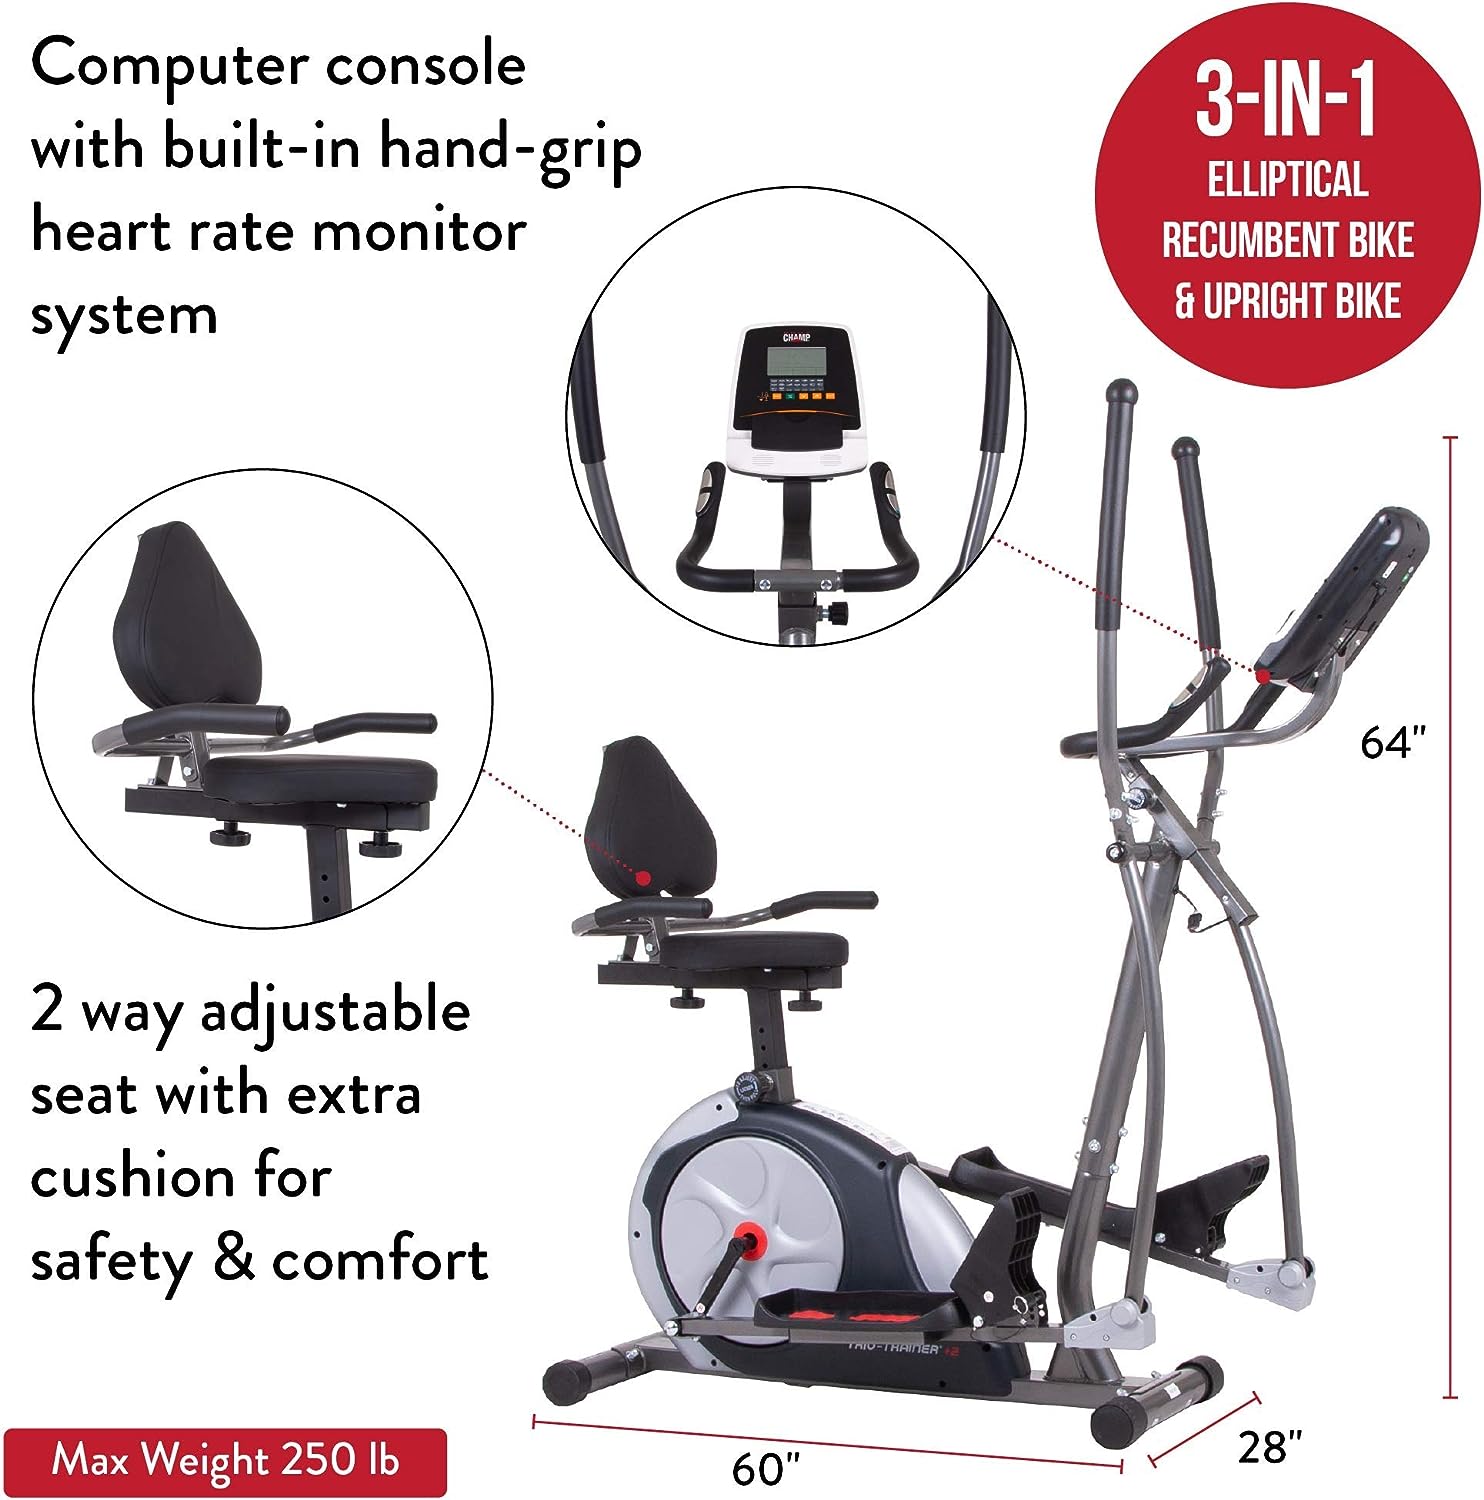 Body Champ 3-in-1 Home Gym, Upright Exercise Bike, Elliptical Machine  Recumbent Bike, Trio Trainer Exercise Machine Plus Two Upper Body Options, Silver, BRT7989